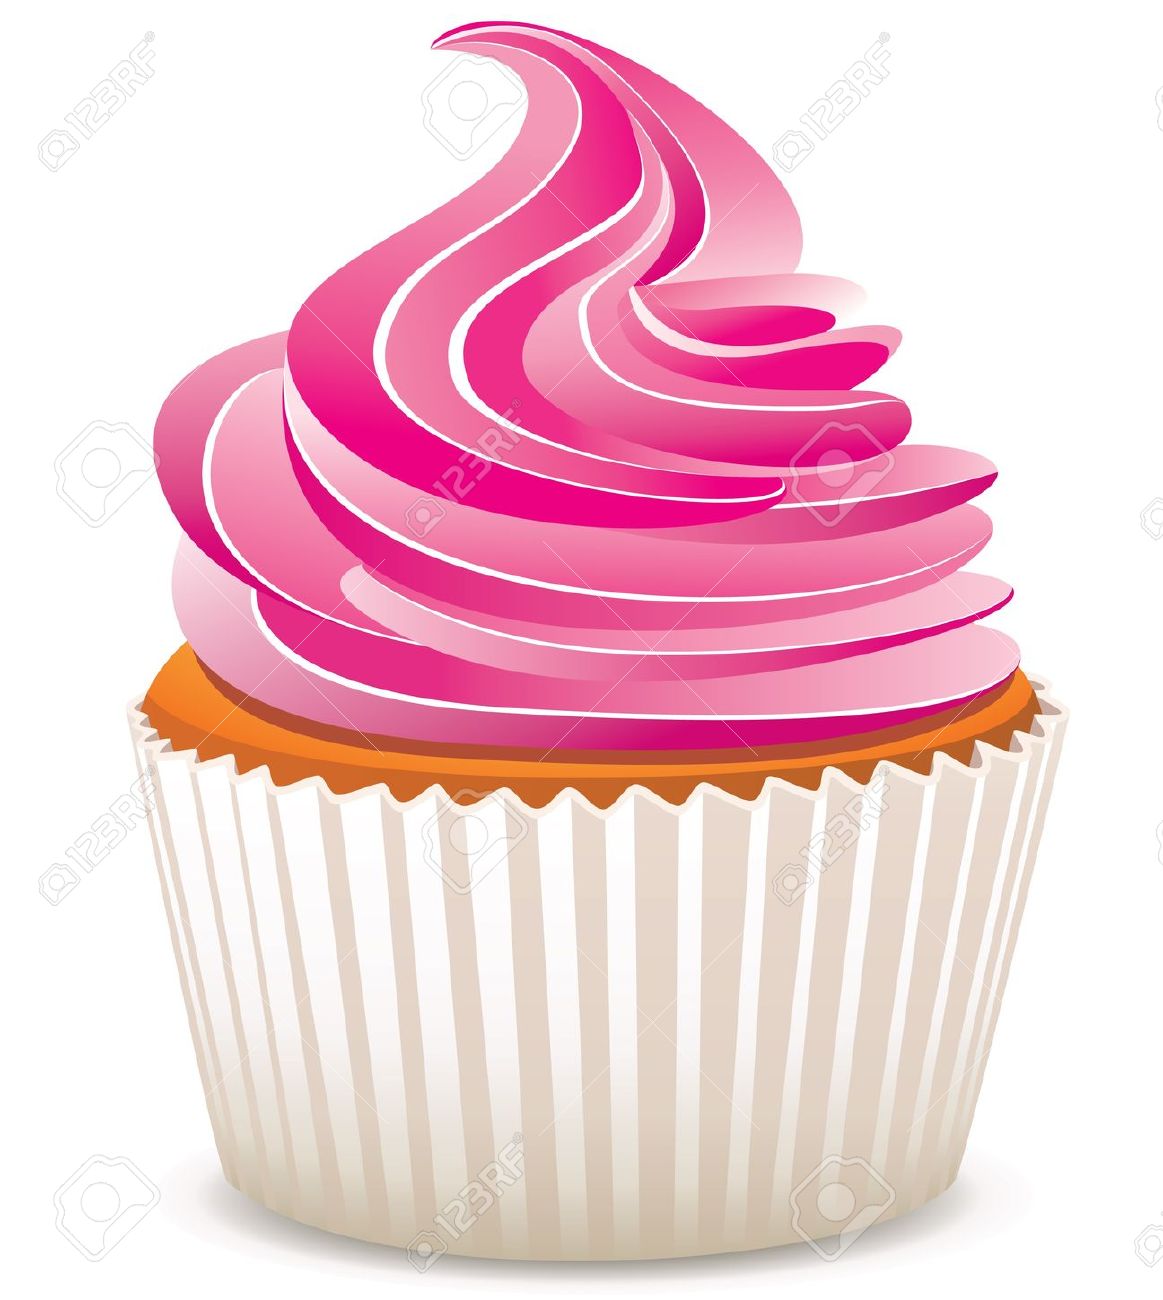 Cupcake clipart free clipart images